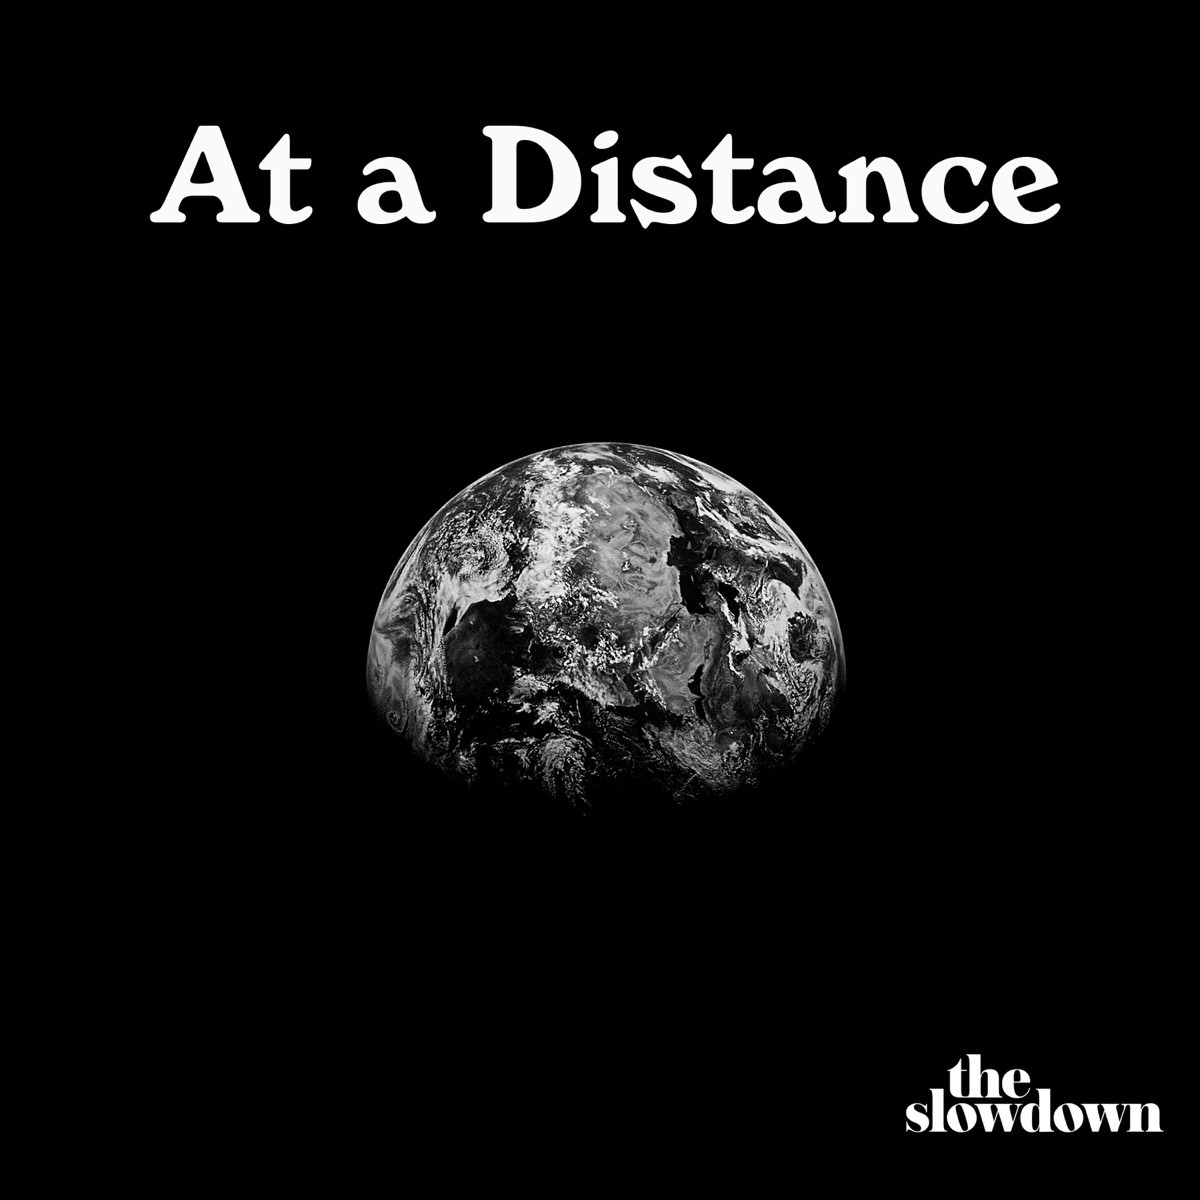 “At a Distance” by Andrew Zuckerman, 1968 